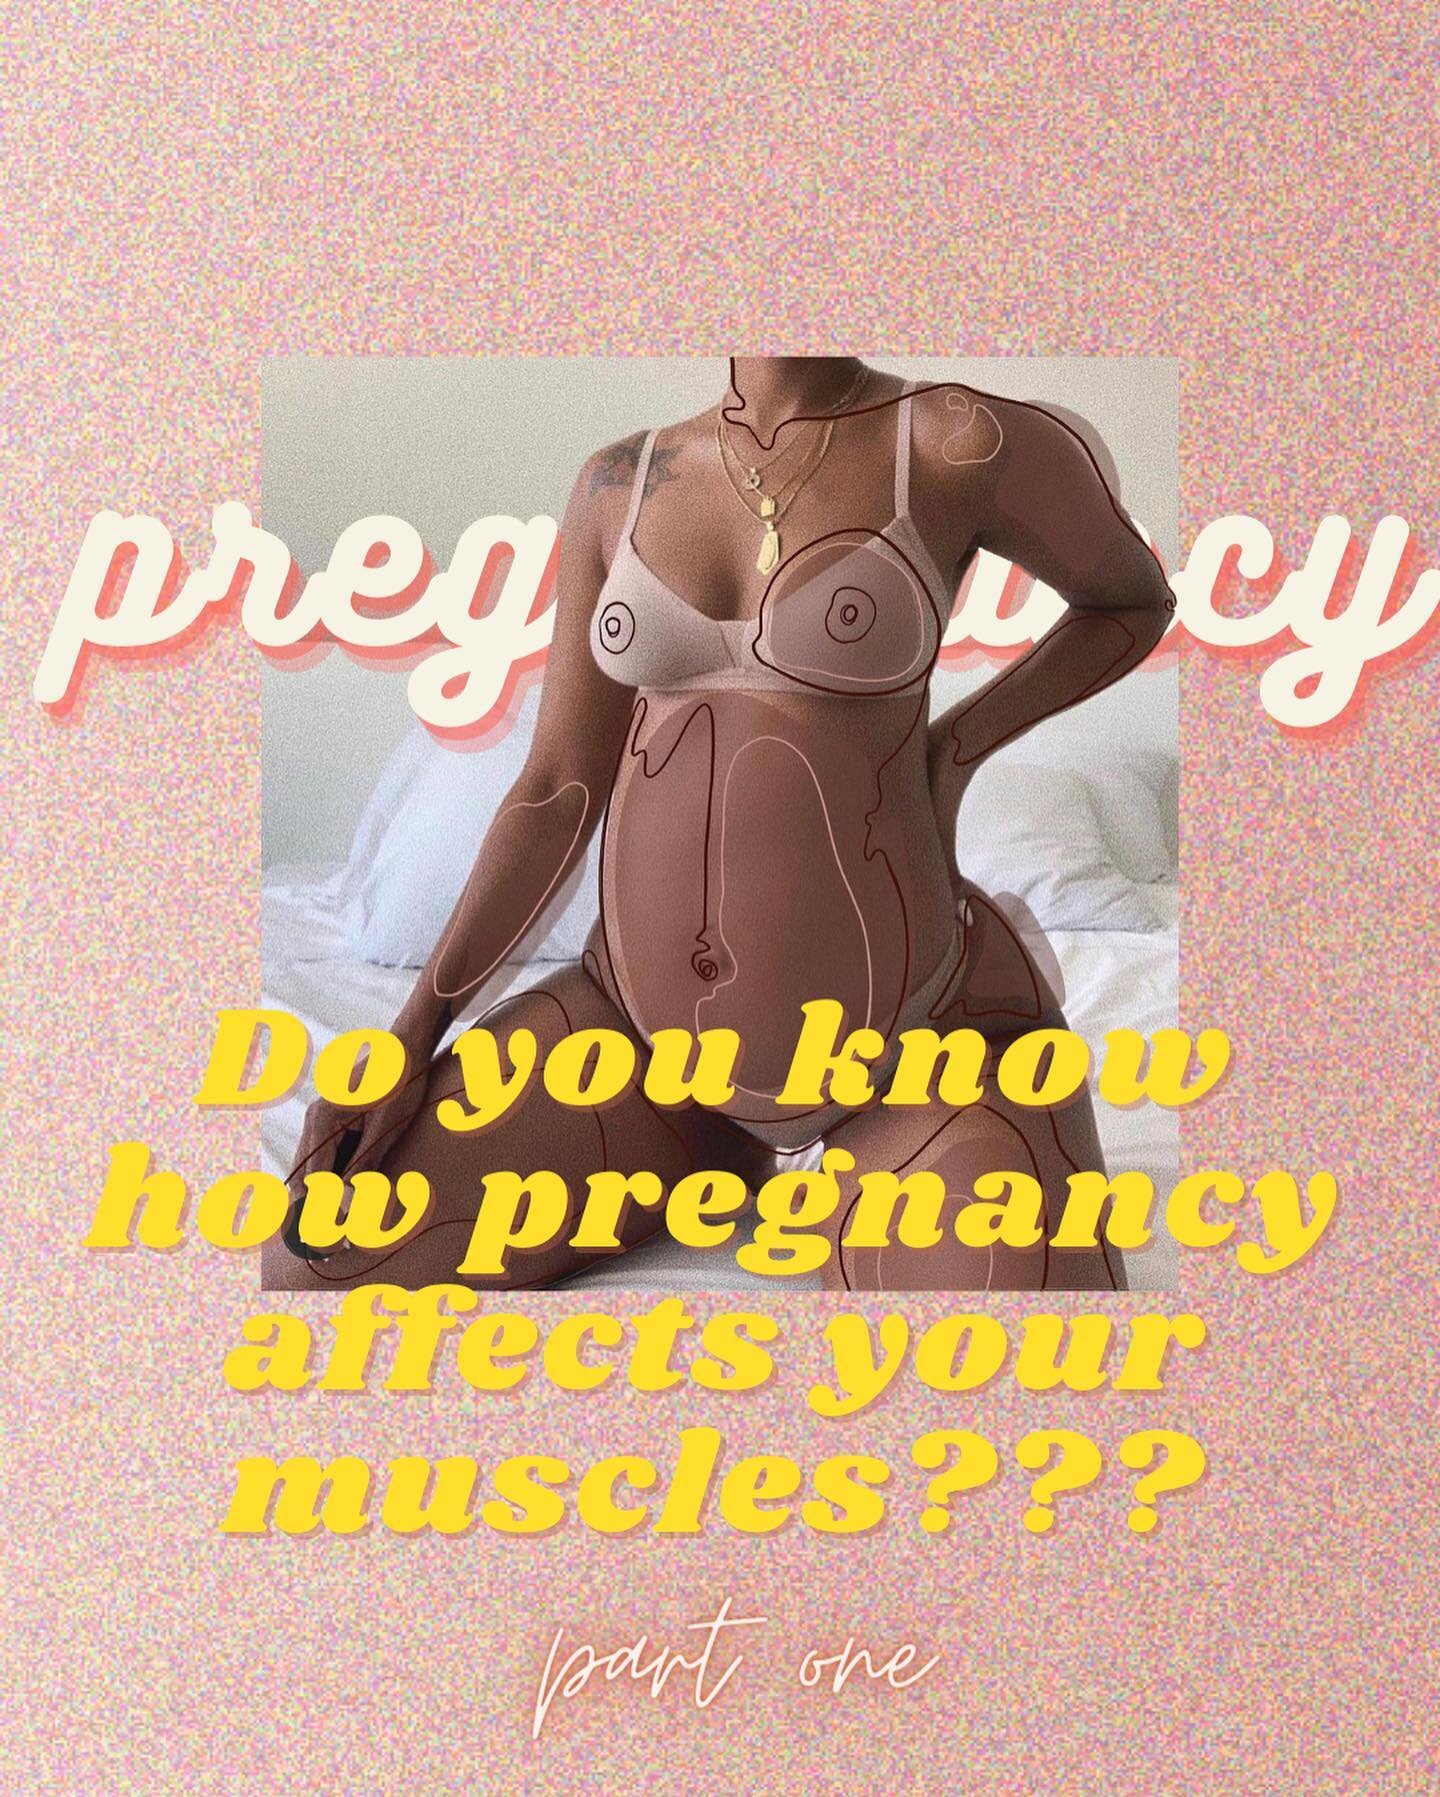 Did you know that pregnancy affects your muscles? 

While there are many affects on the body, these are some of the most common conditions I see in pregnancy and some tips to help! 

Common Condition:  Anterior tilting of the pelvis is caused by incr